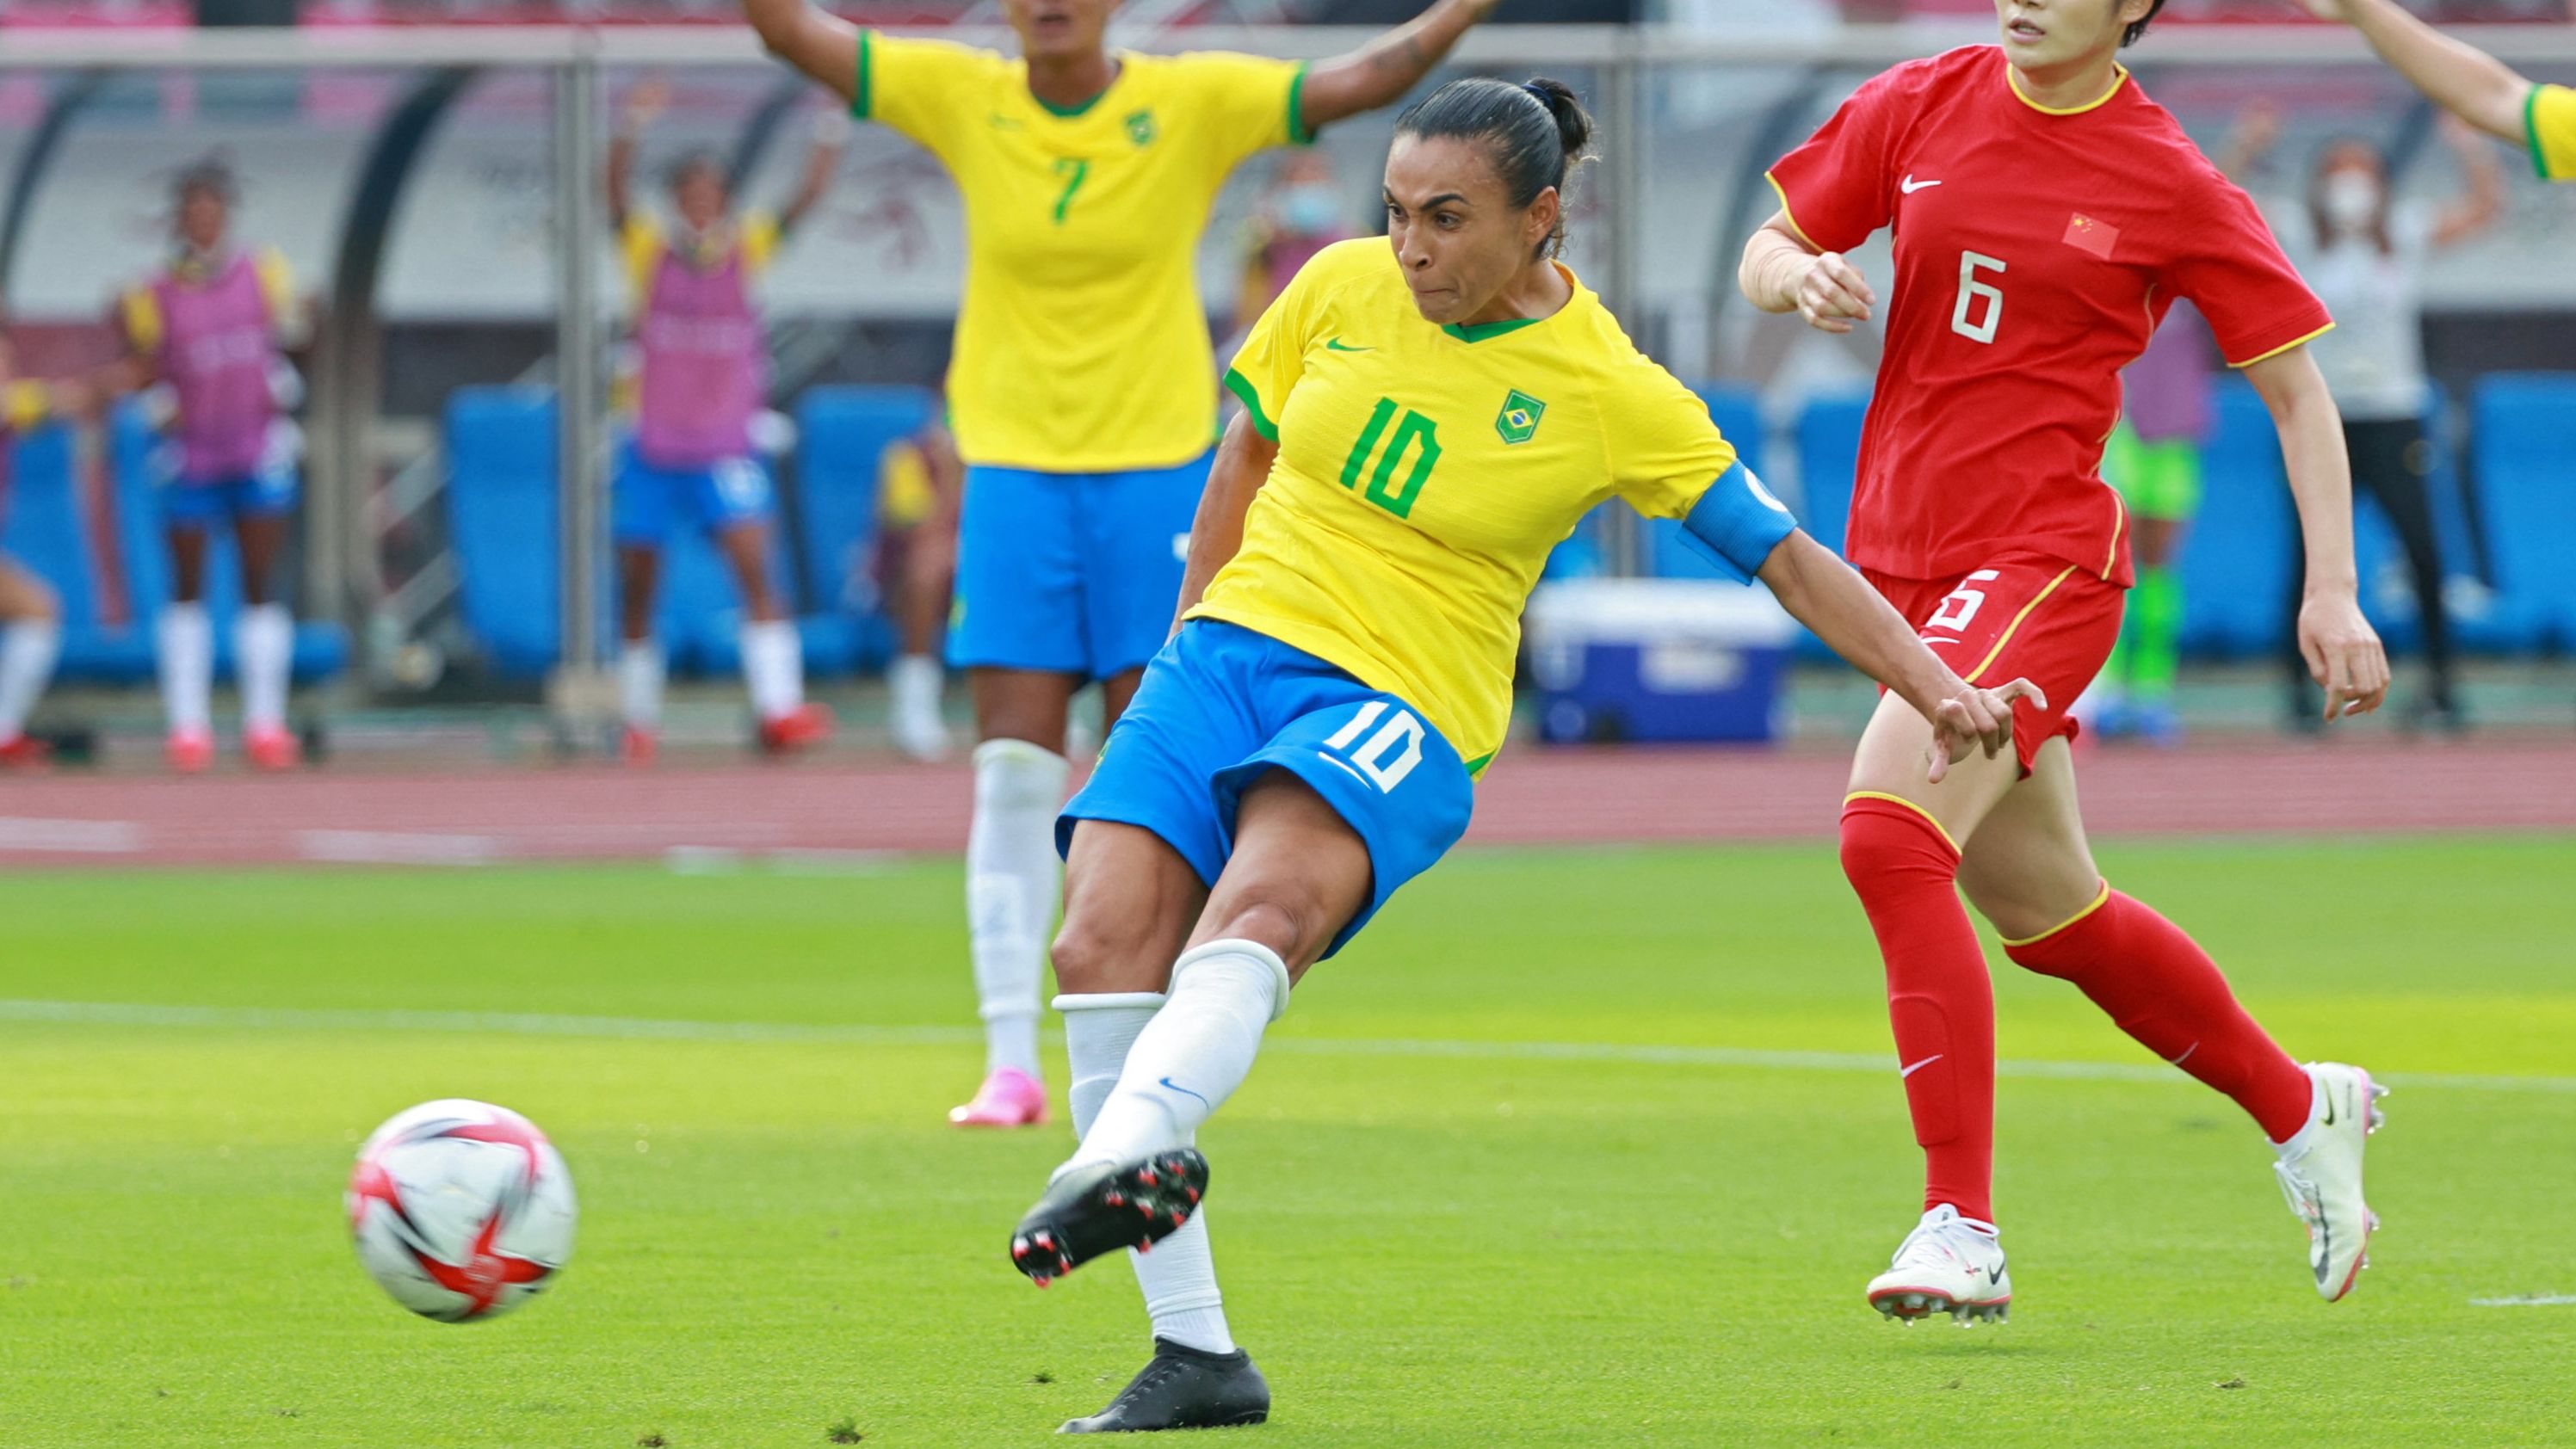 Brazil's midfielder Marta shoots to score the opening goal during the match against China.